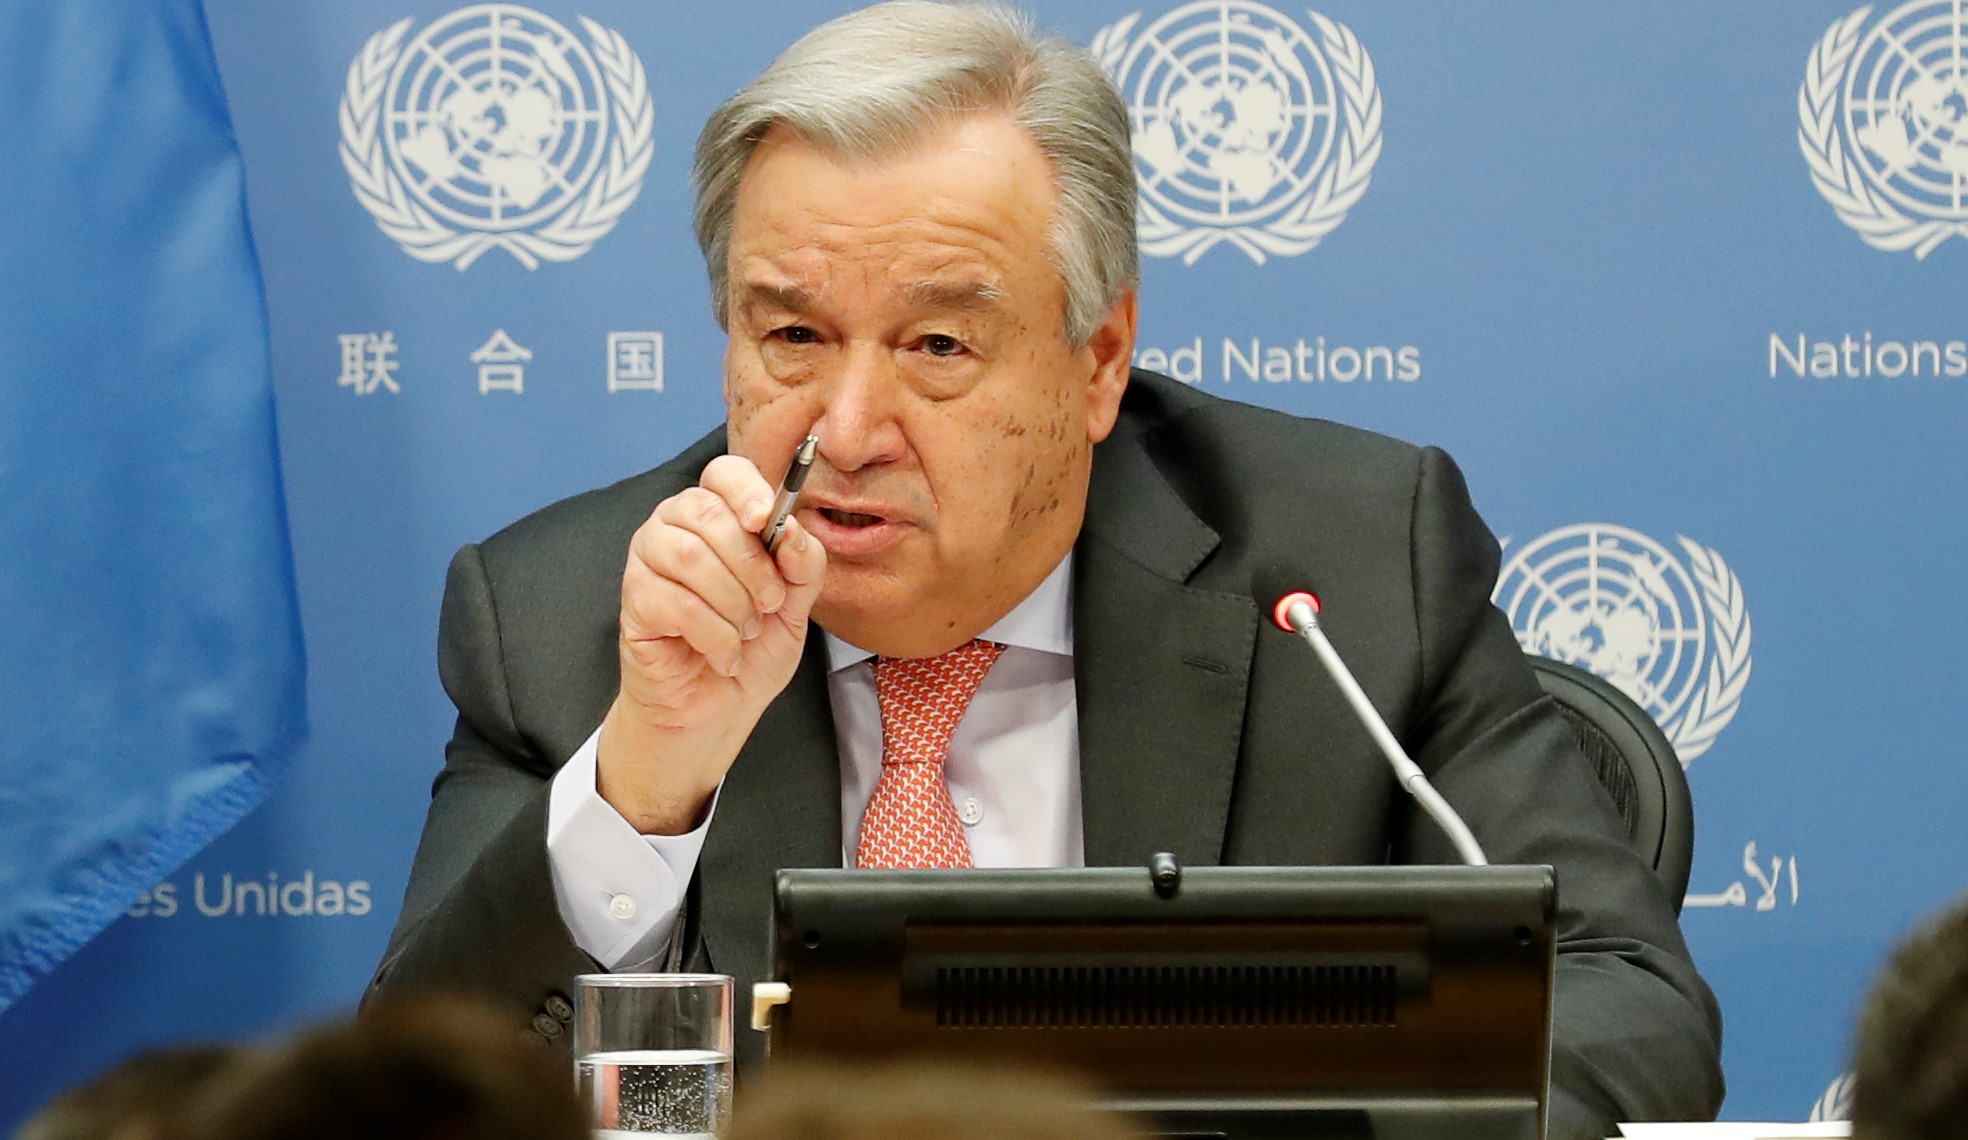 UN chief: West Bank annexation would violate international law